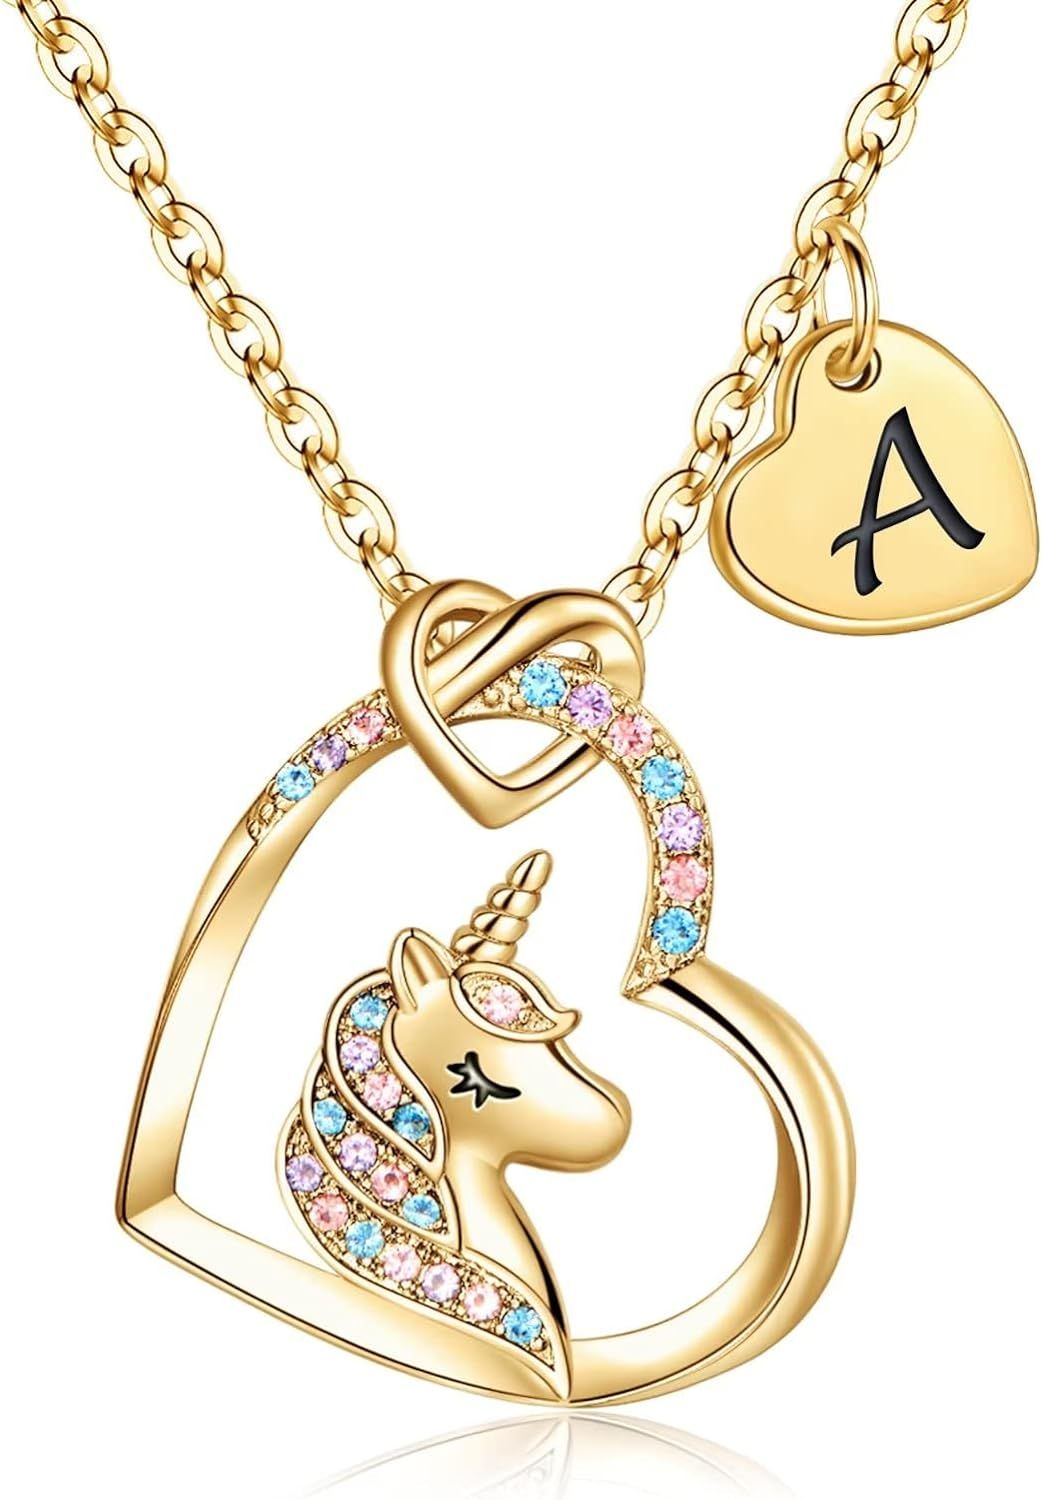 Hidepoo Christmas Gifts Unicorn Gifts for Girls - 14K Gold/White Gold/Rose Gold Plated Colorful CZ H | Amazon (US)